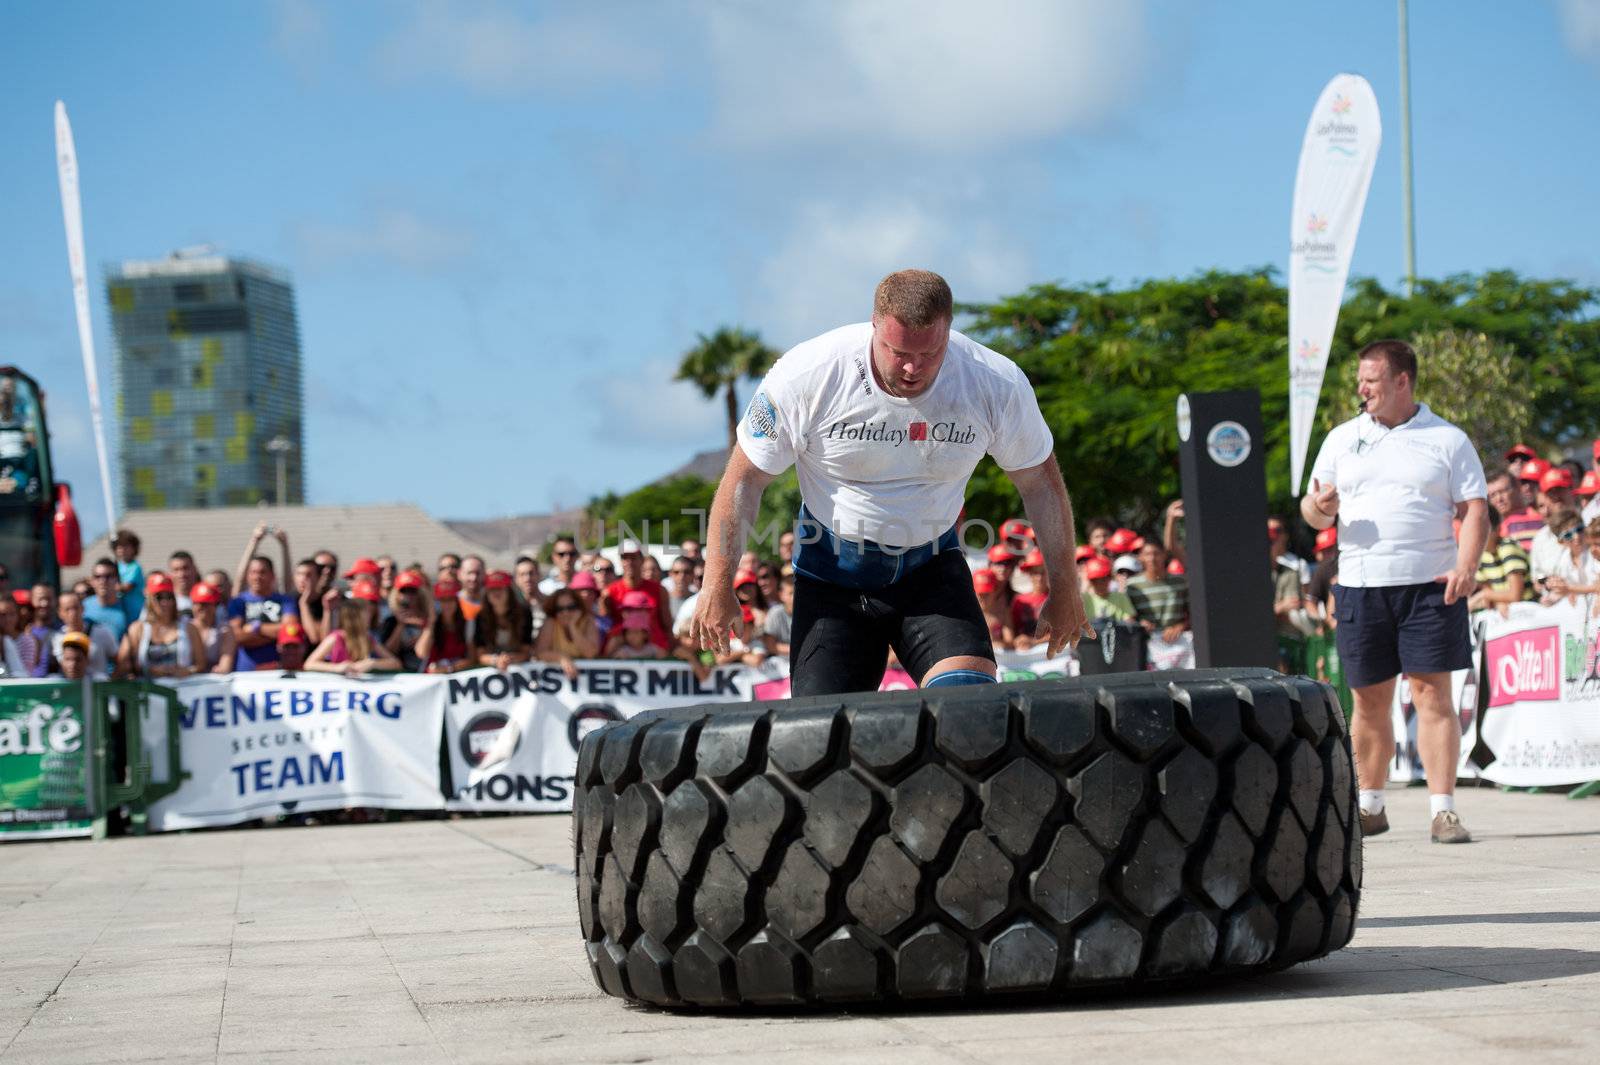 CANARY ISLANDS - SEPTEMBER 03: Lauri Nami (m) from Estonia lifting and rolling a wheel (weights 400kg) 8 times during Strongman Champions League in Las Palmas September 03, 2011 in Canary Islands, Spain